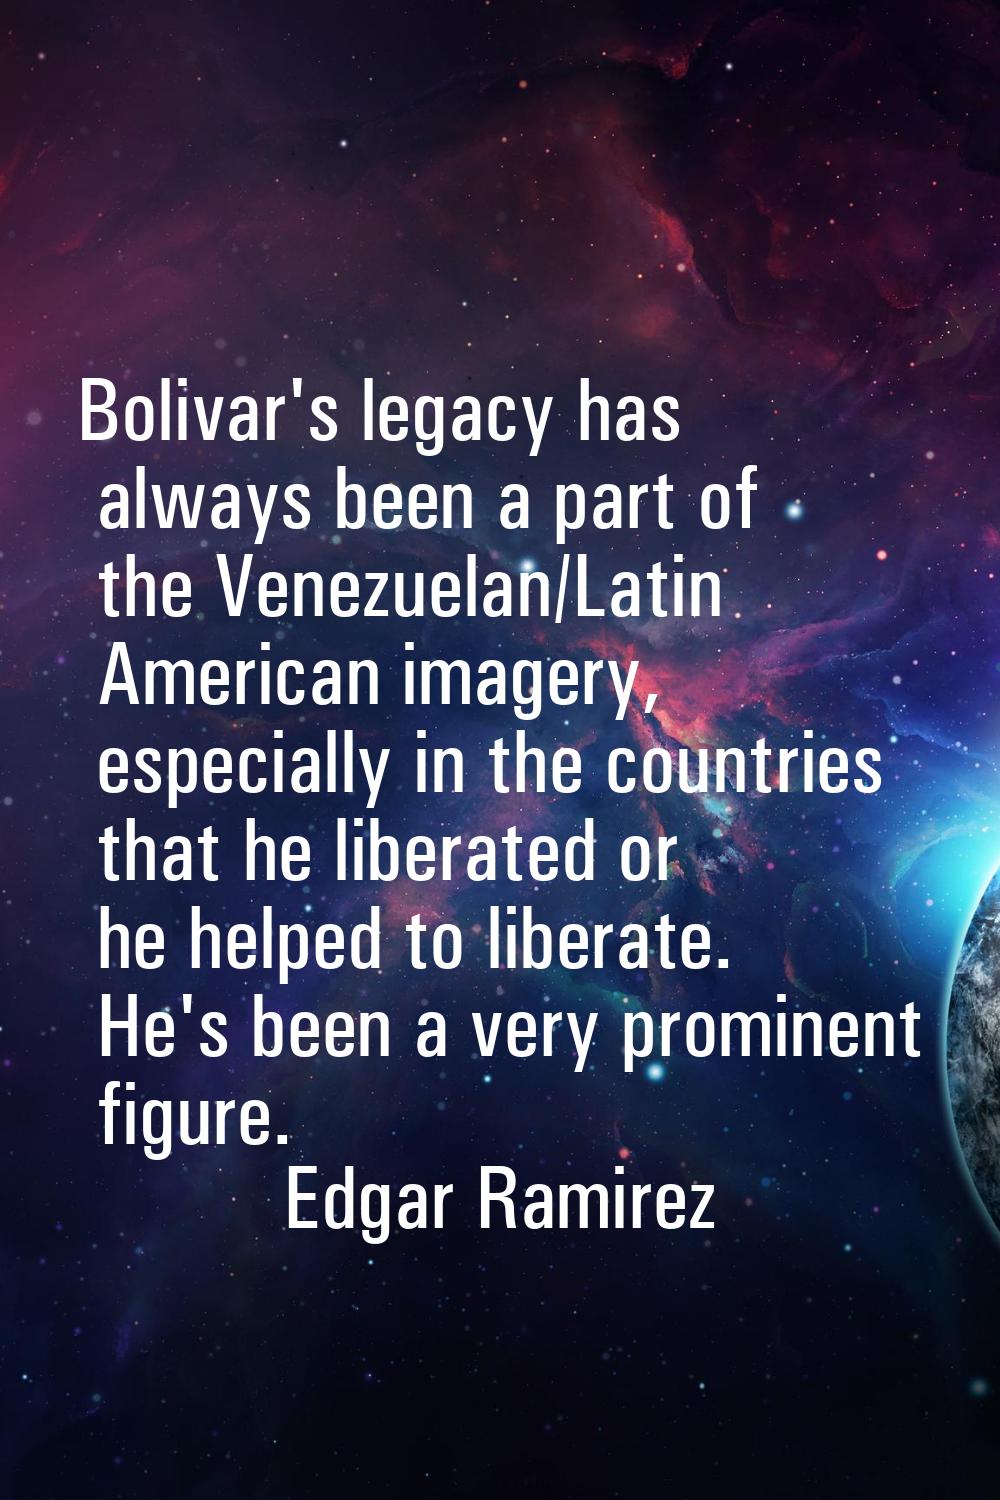 Bolivar's legacy has always been a part of the Venezuelan/Latin American imagery, especially in the